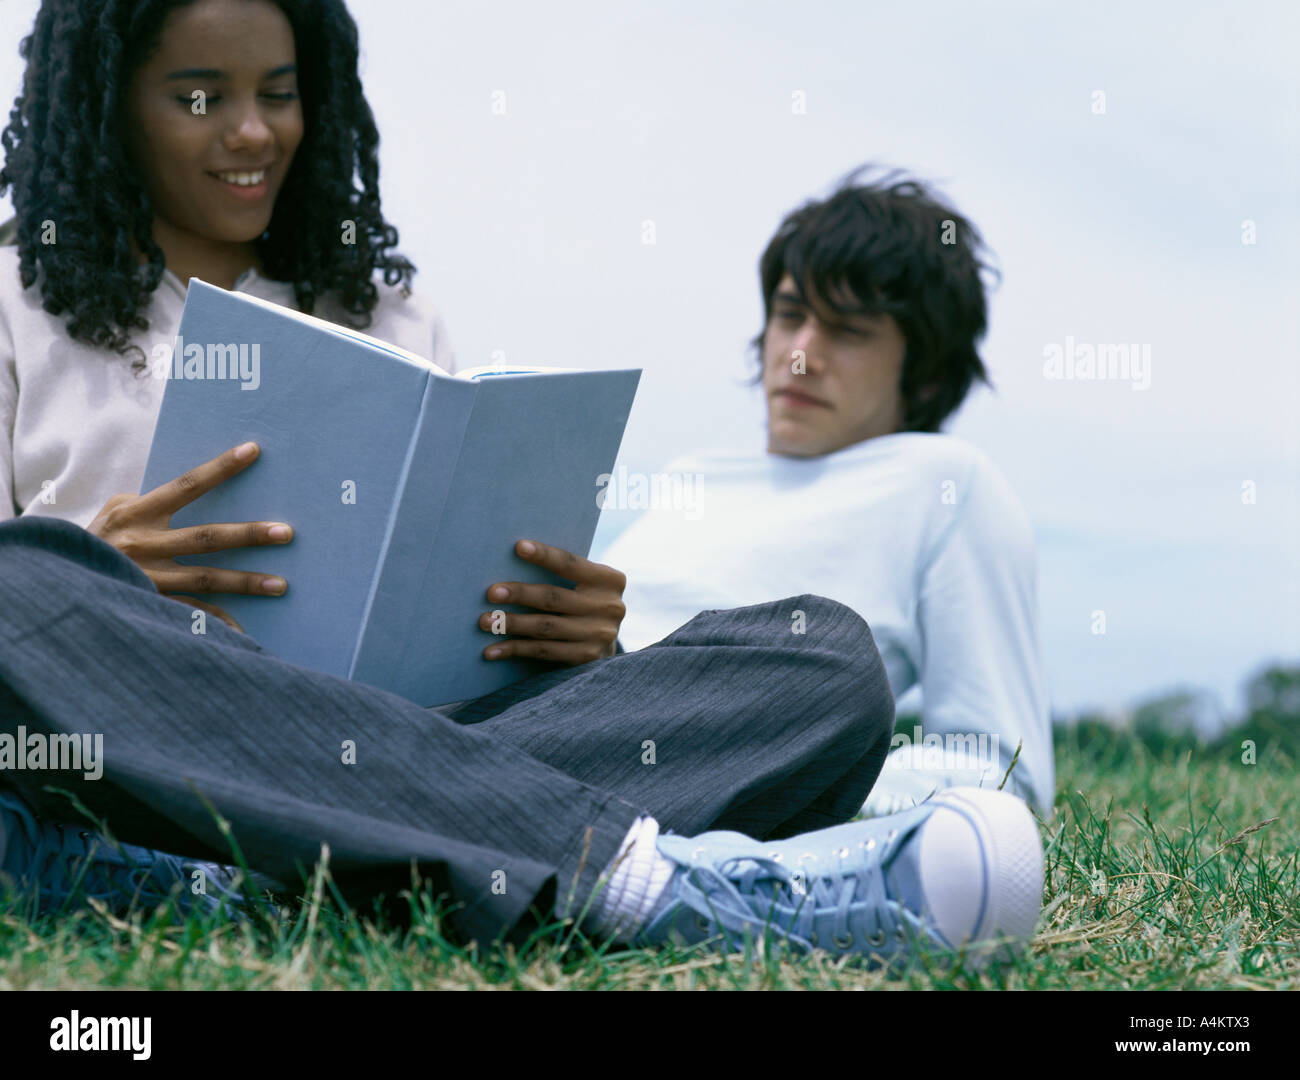 Young woman sitting on grass reading book, young man leaning on elbow behind her Stock Photo